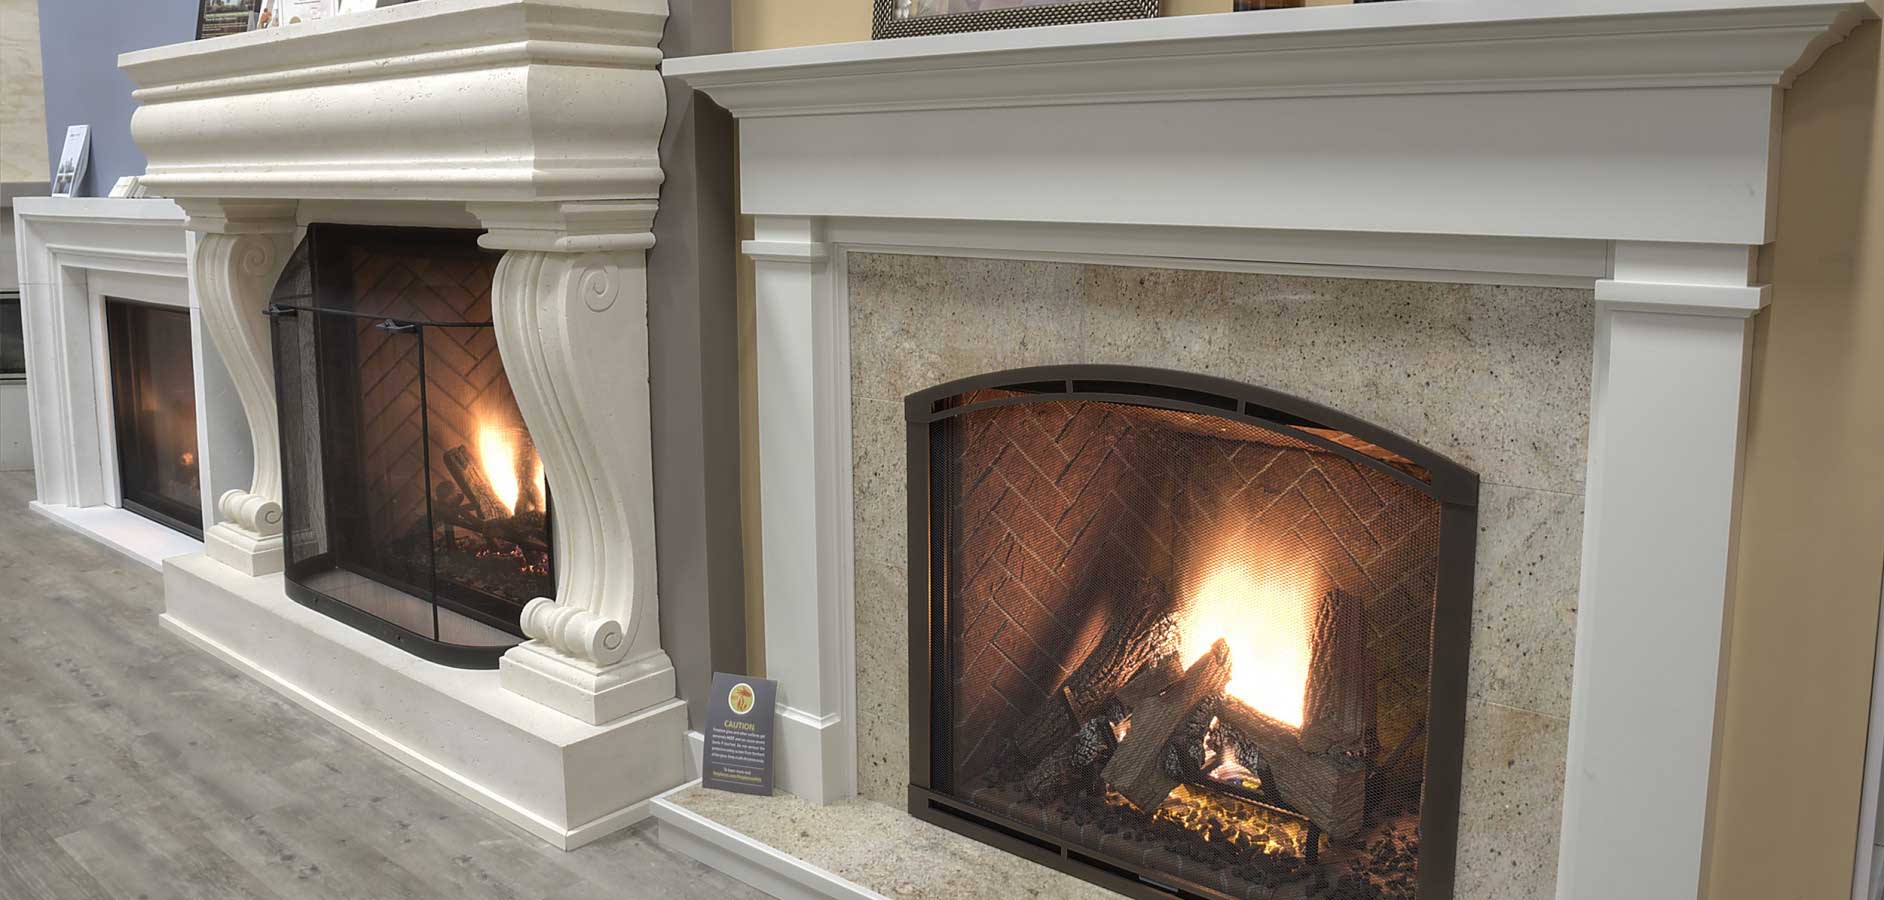 Fireplace Specialties - Fireplaces, Stoves & Barbecues